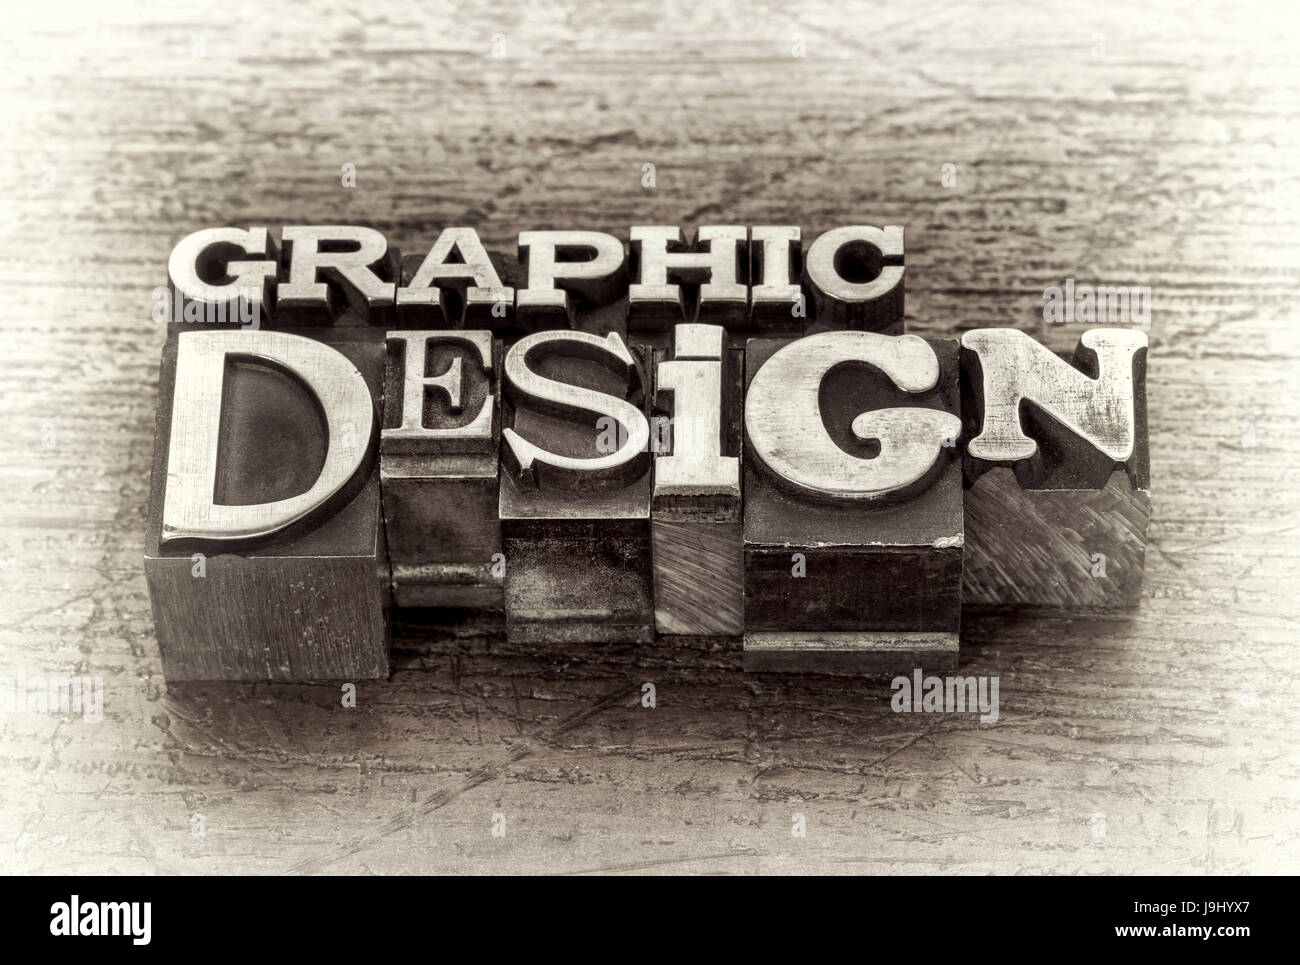 graphic design word abstract in mixed vintage metal type printing blocks over grunge wood, black and white image Stock Photo